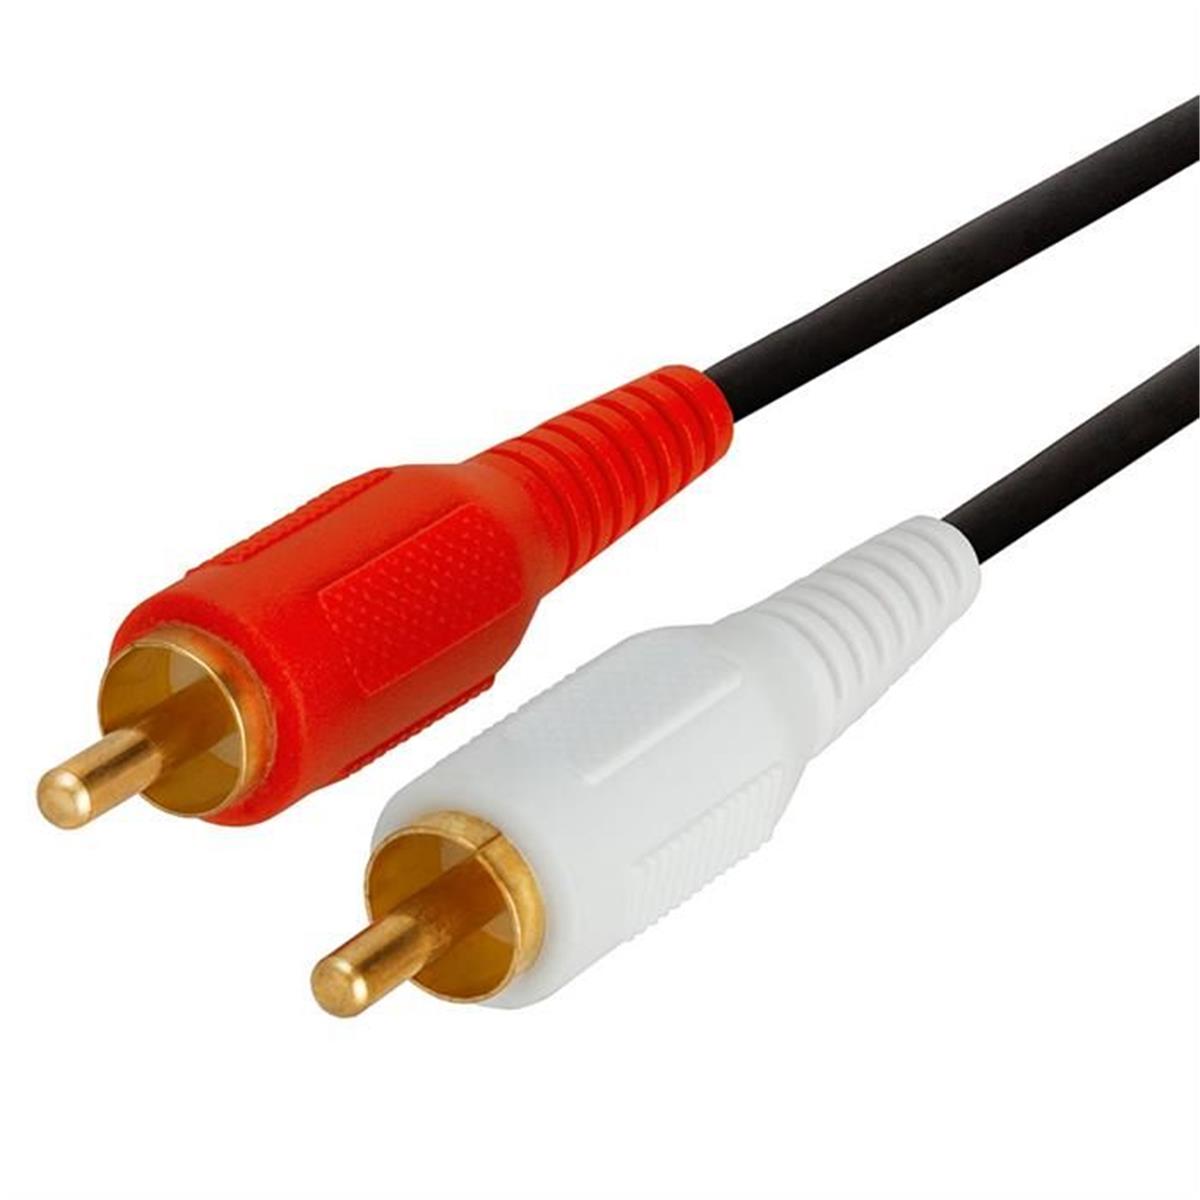 393-n Rca Male To Male Gold Stereo Audio Cable - 3 Ft.